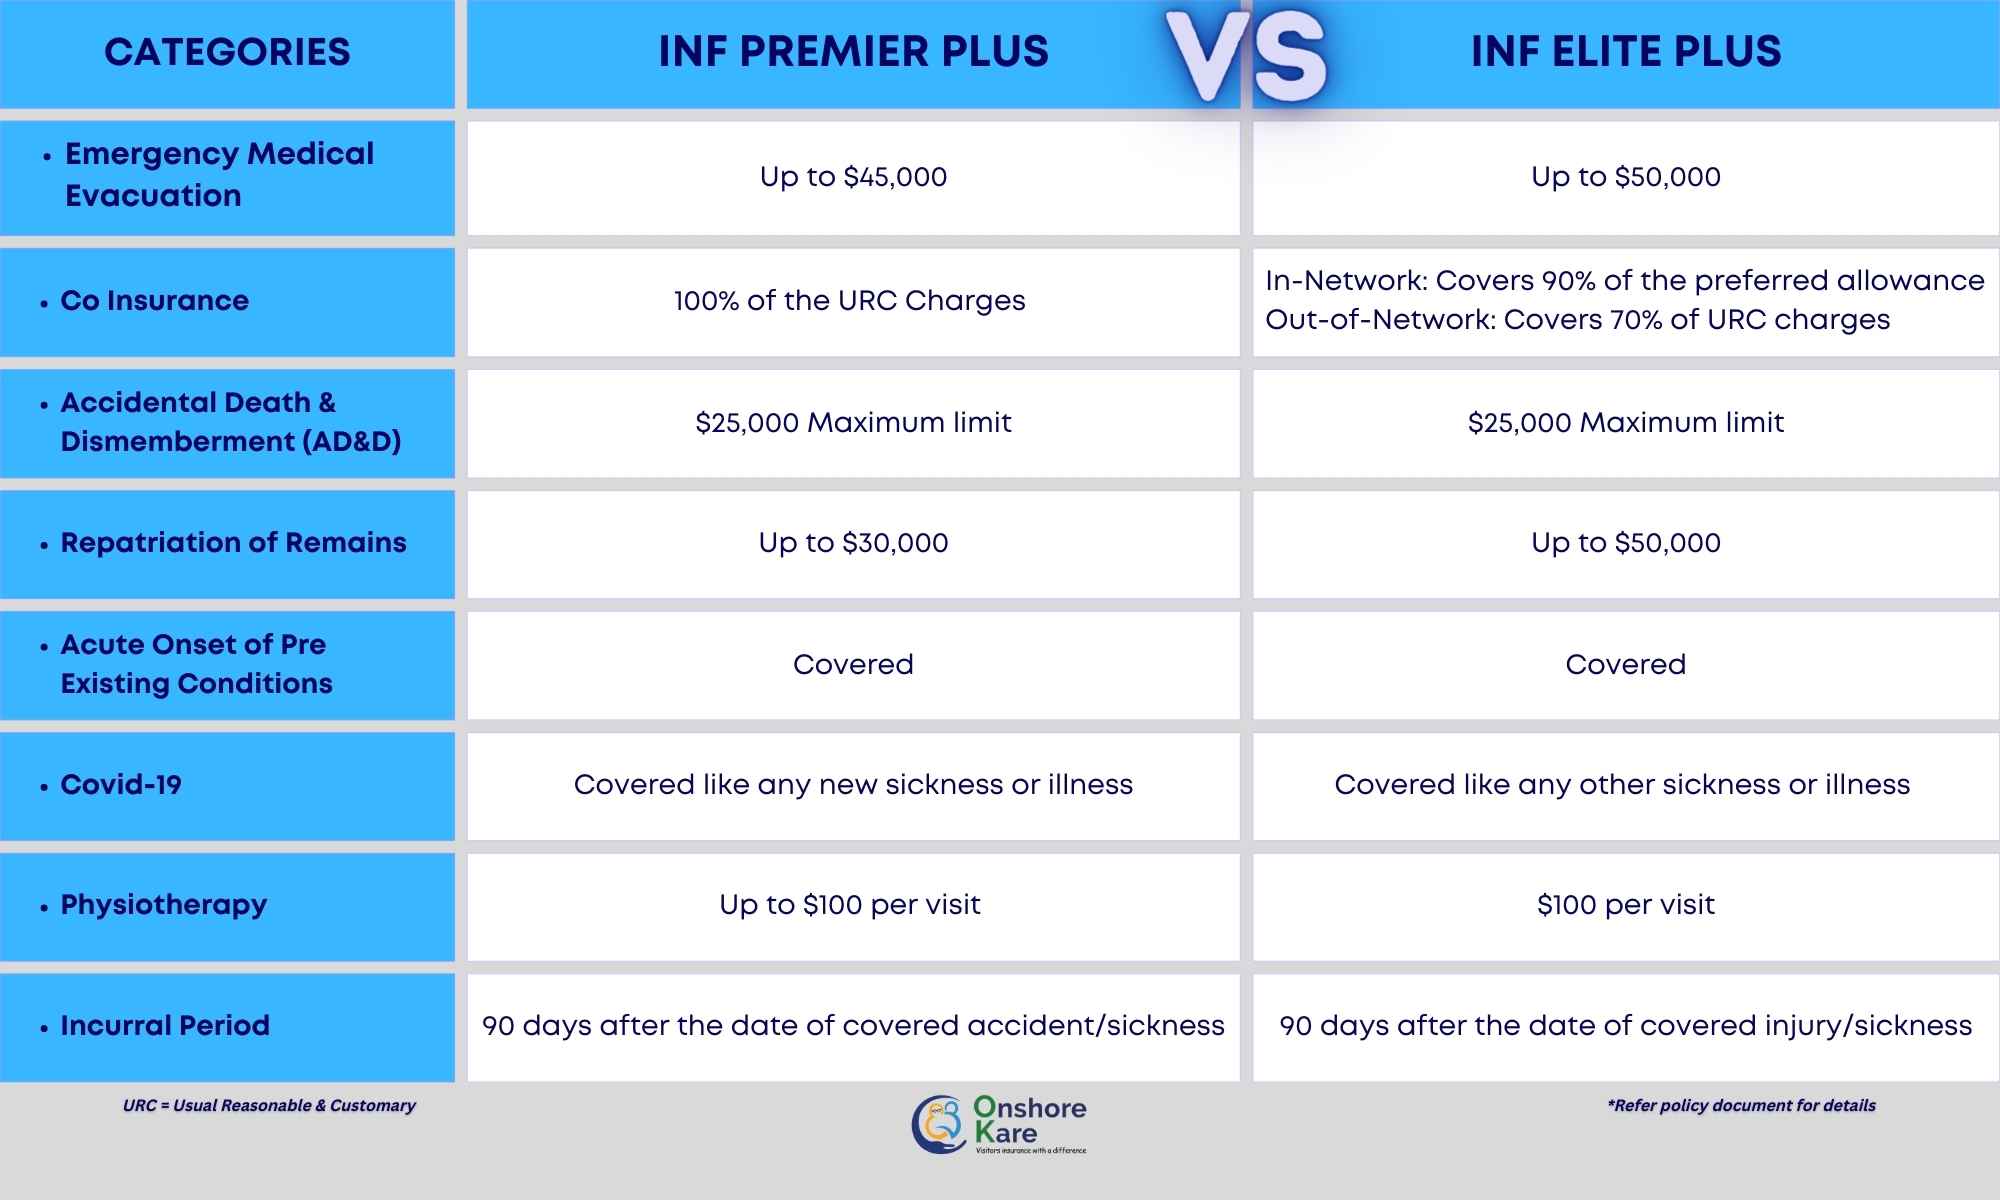 Some Coverages of INF Premier Plus and INF Elite Plus Plans